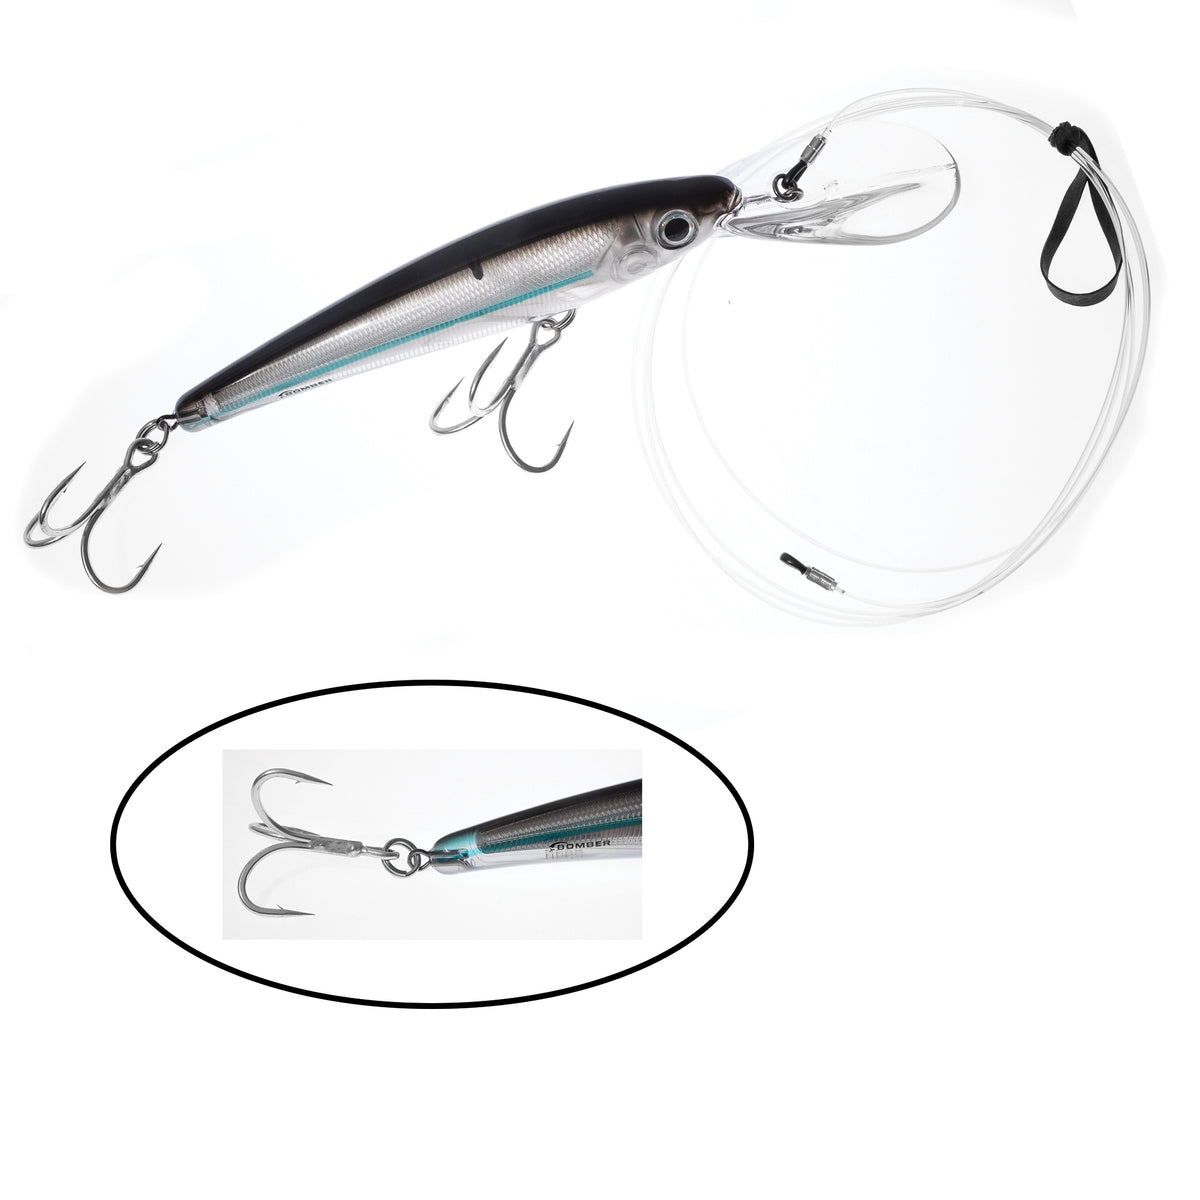 Subsurface Lures – J&B Tackle Co